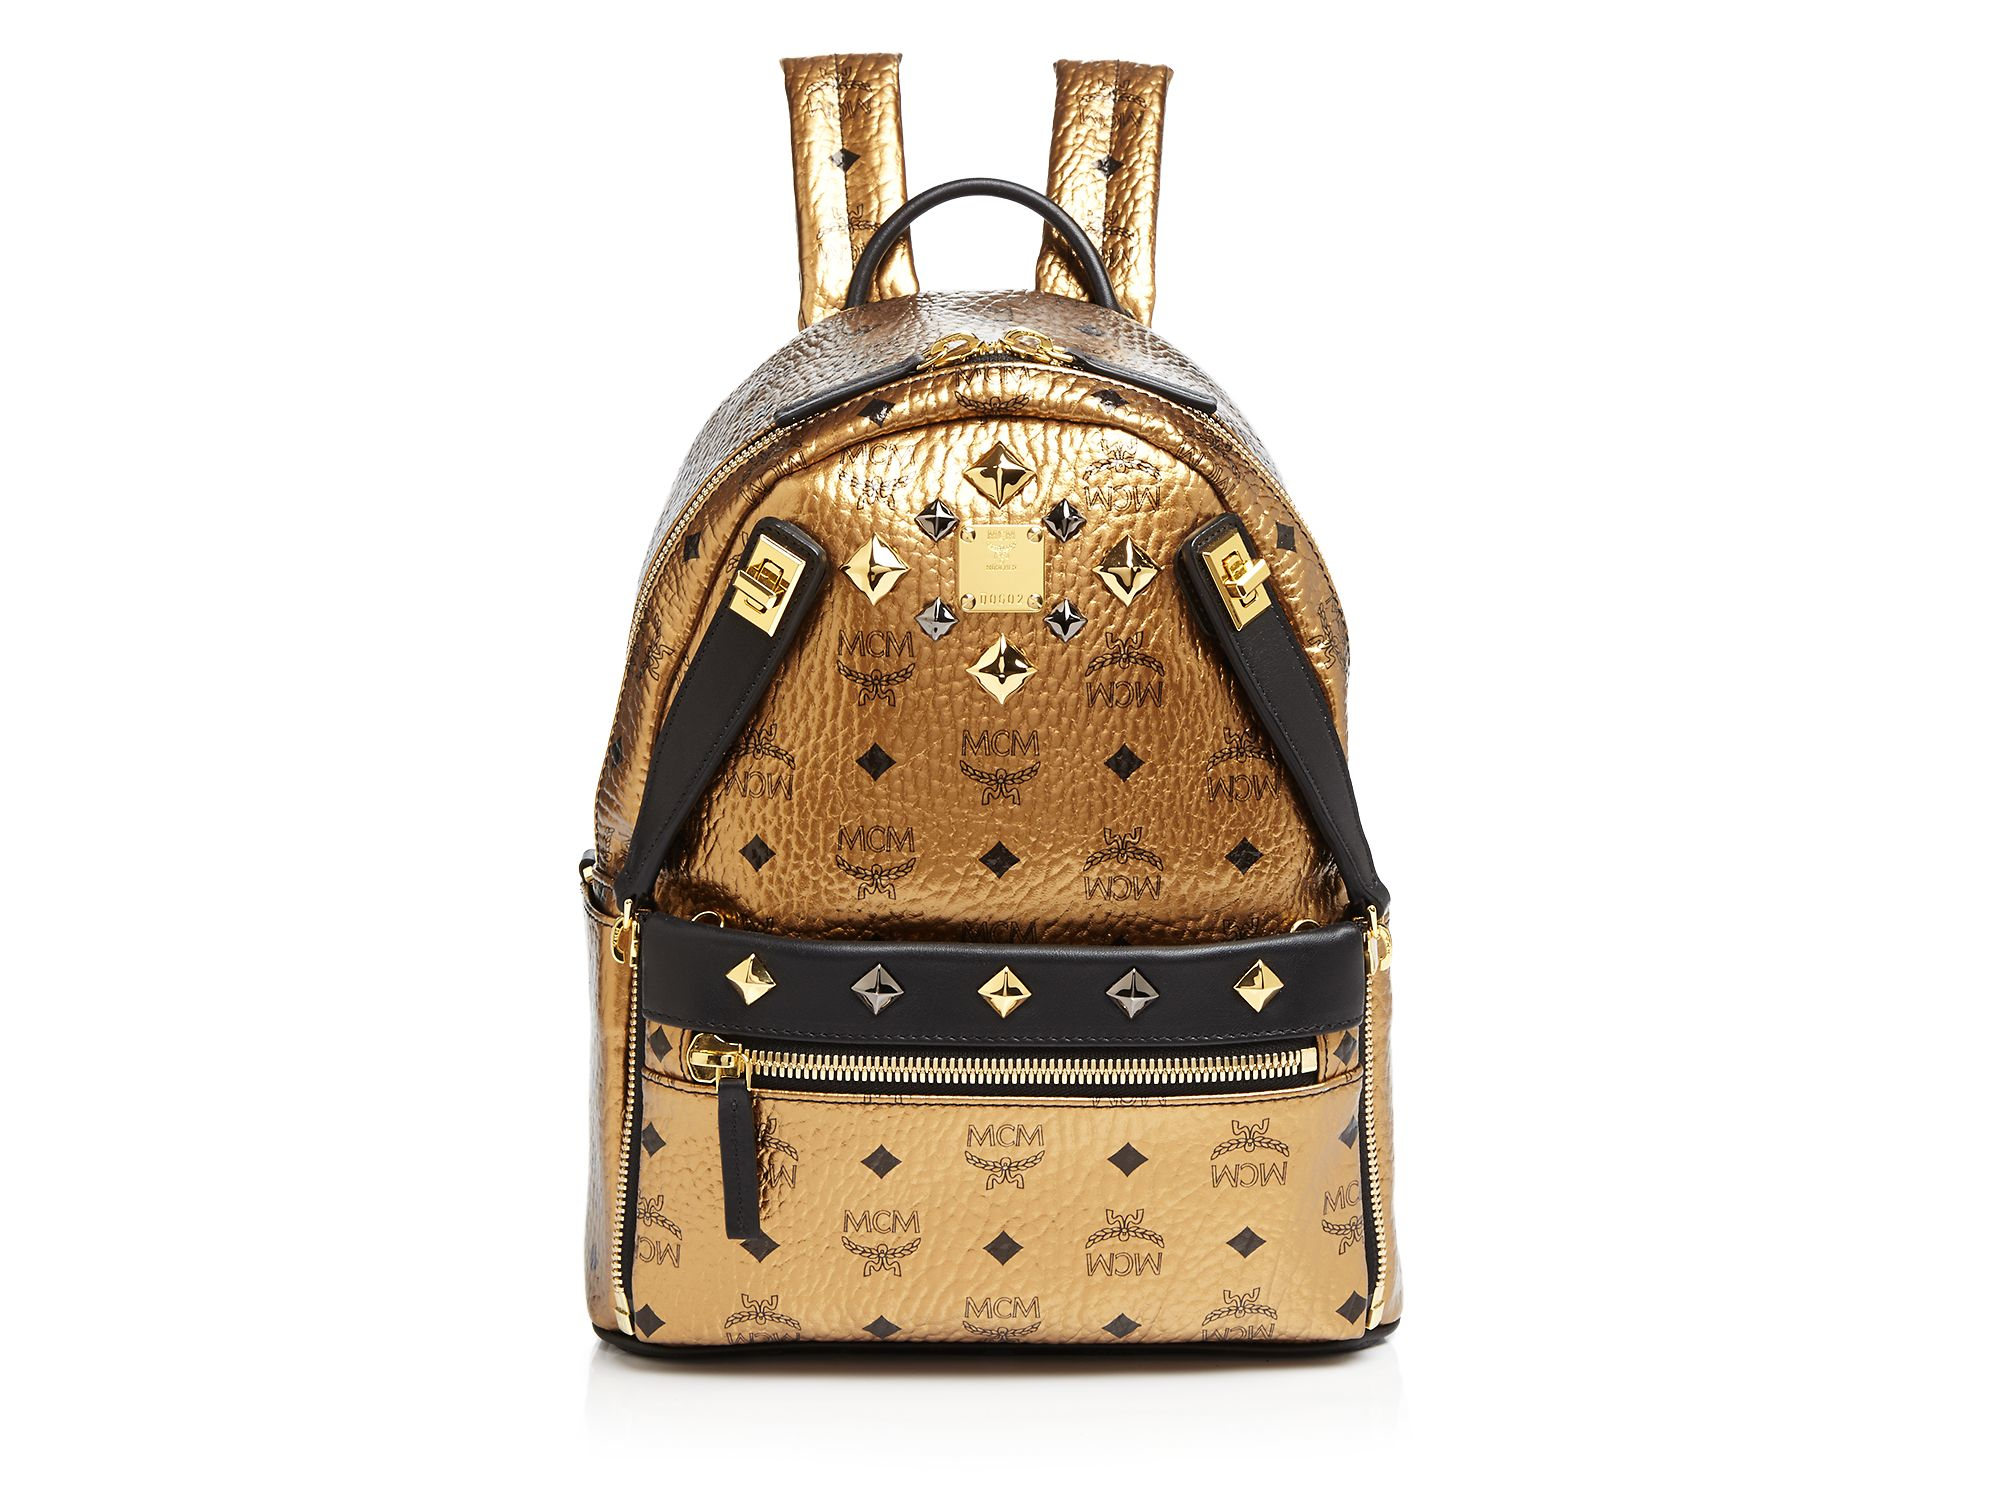 Mcm Backpack - Dual Stark Small Metallic in Gold | Lyst